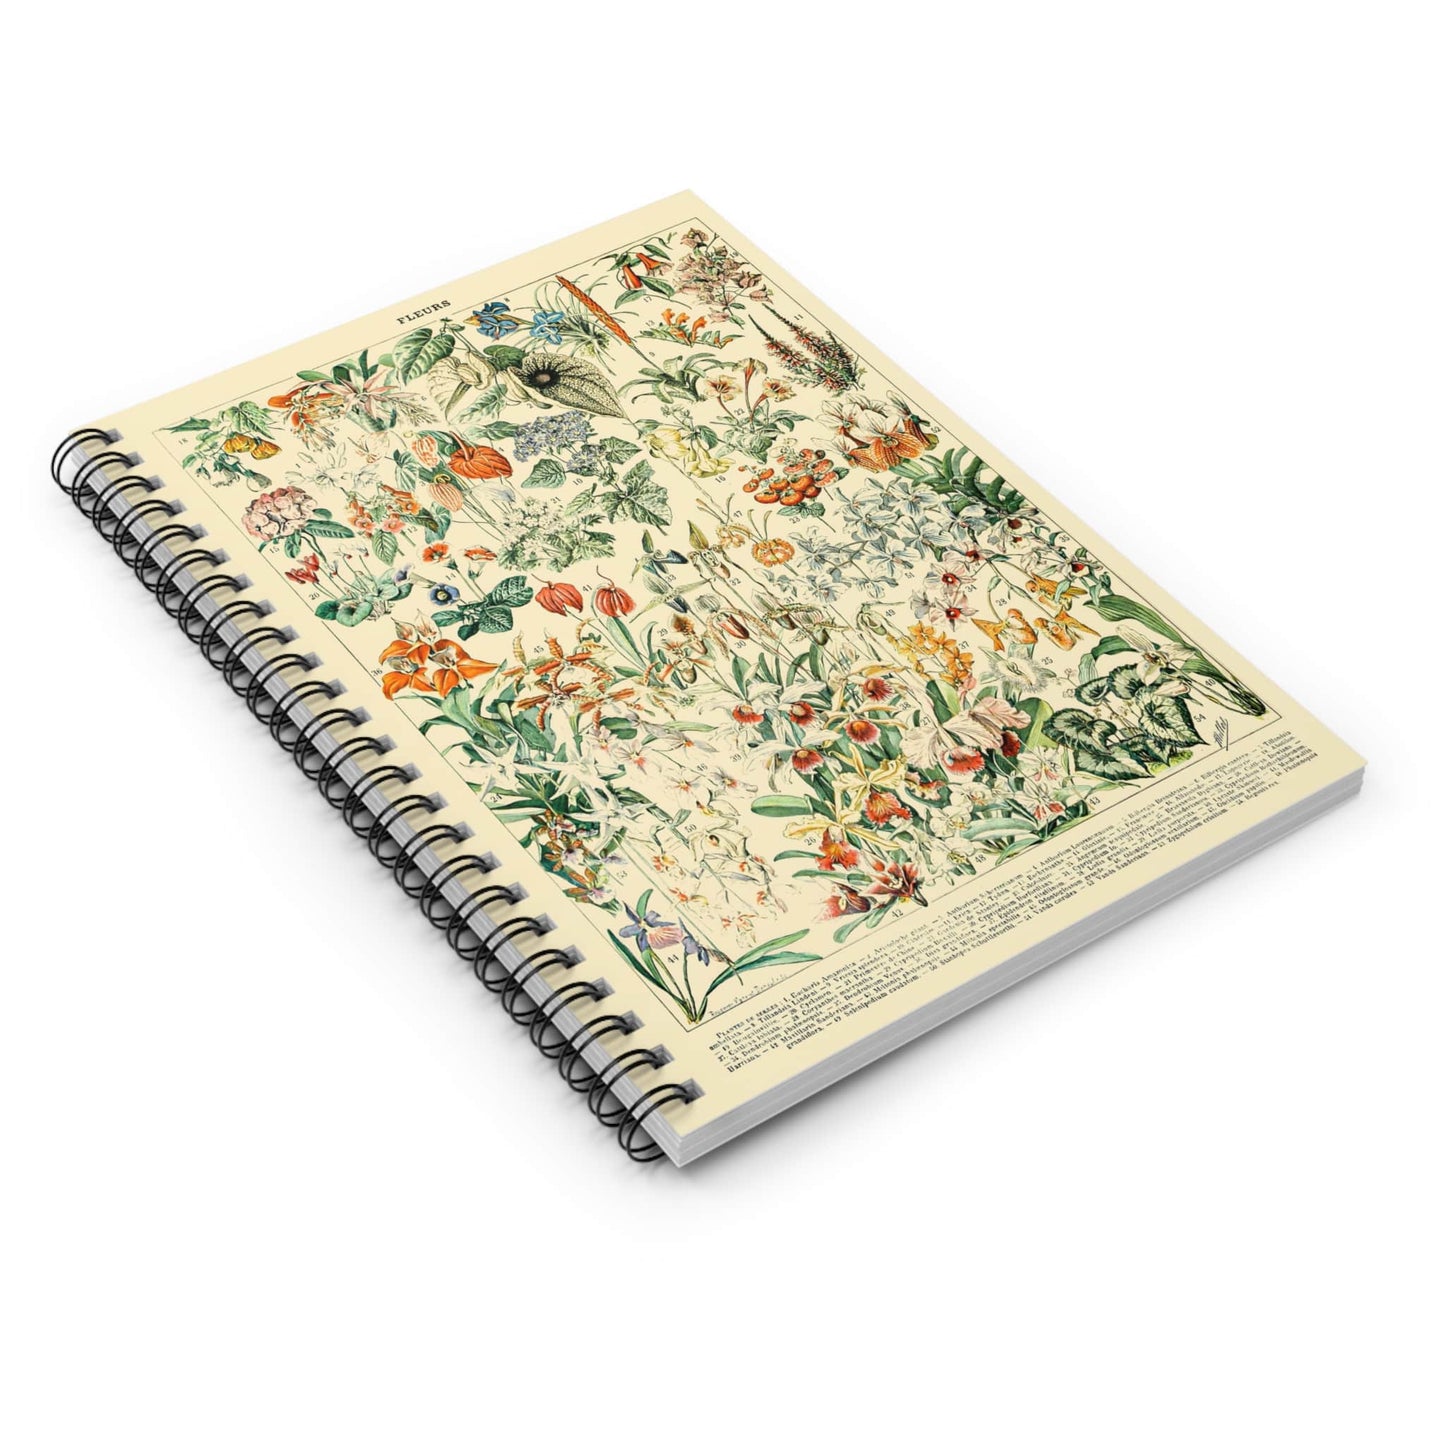 Wildflower and Plants Spiral Notebook Laying Flat on White Surface